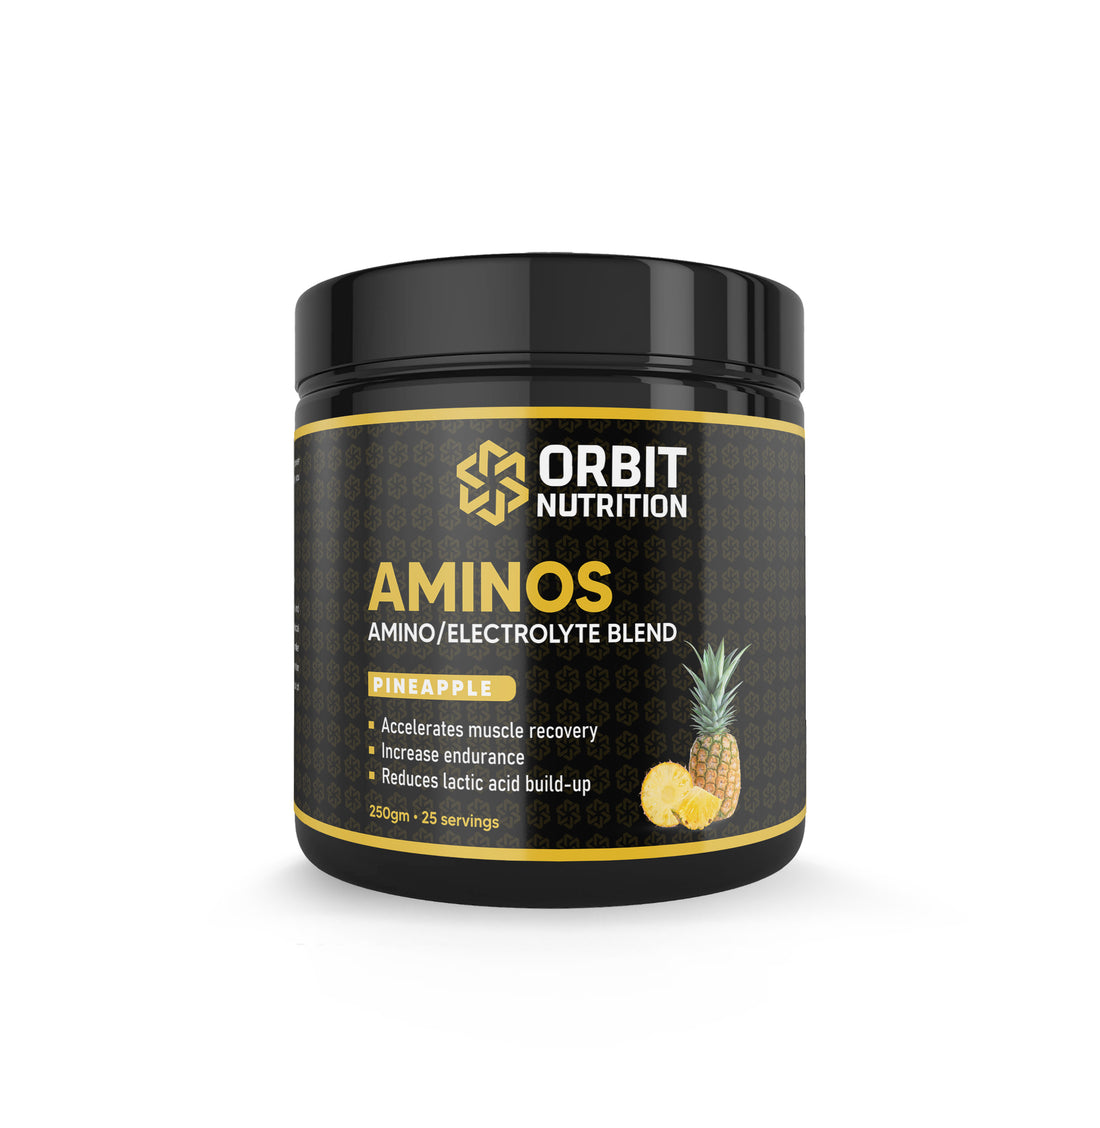 AMINOS - Amino/Electrolyte Blend - Pineapple